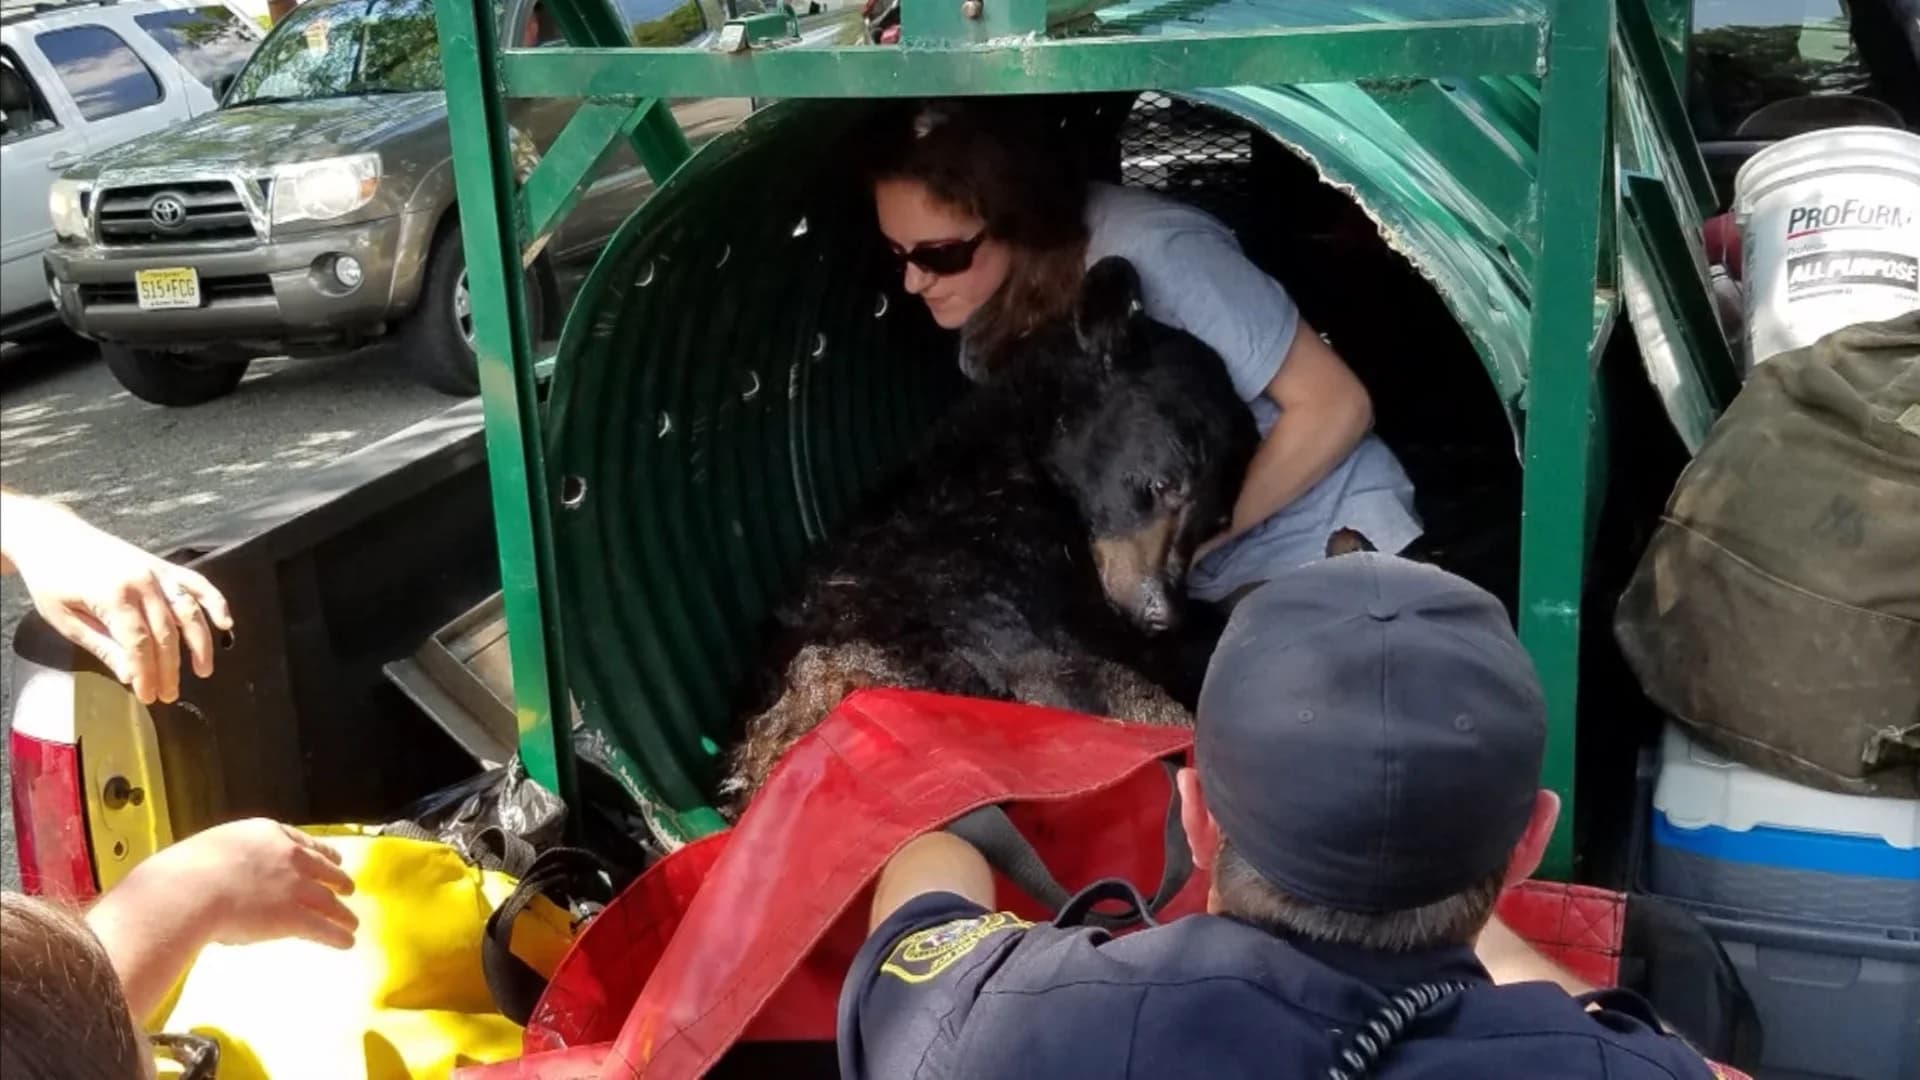 Wildlife officials capture bear found wandering in Union County